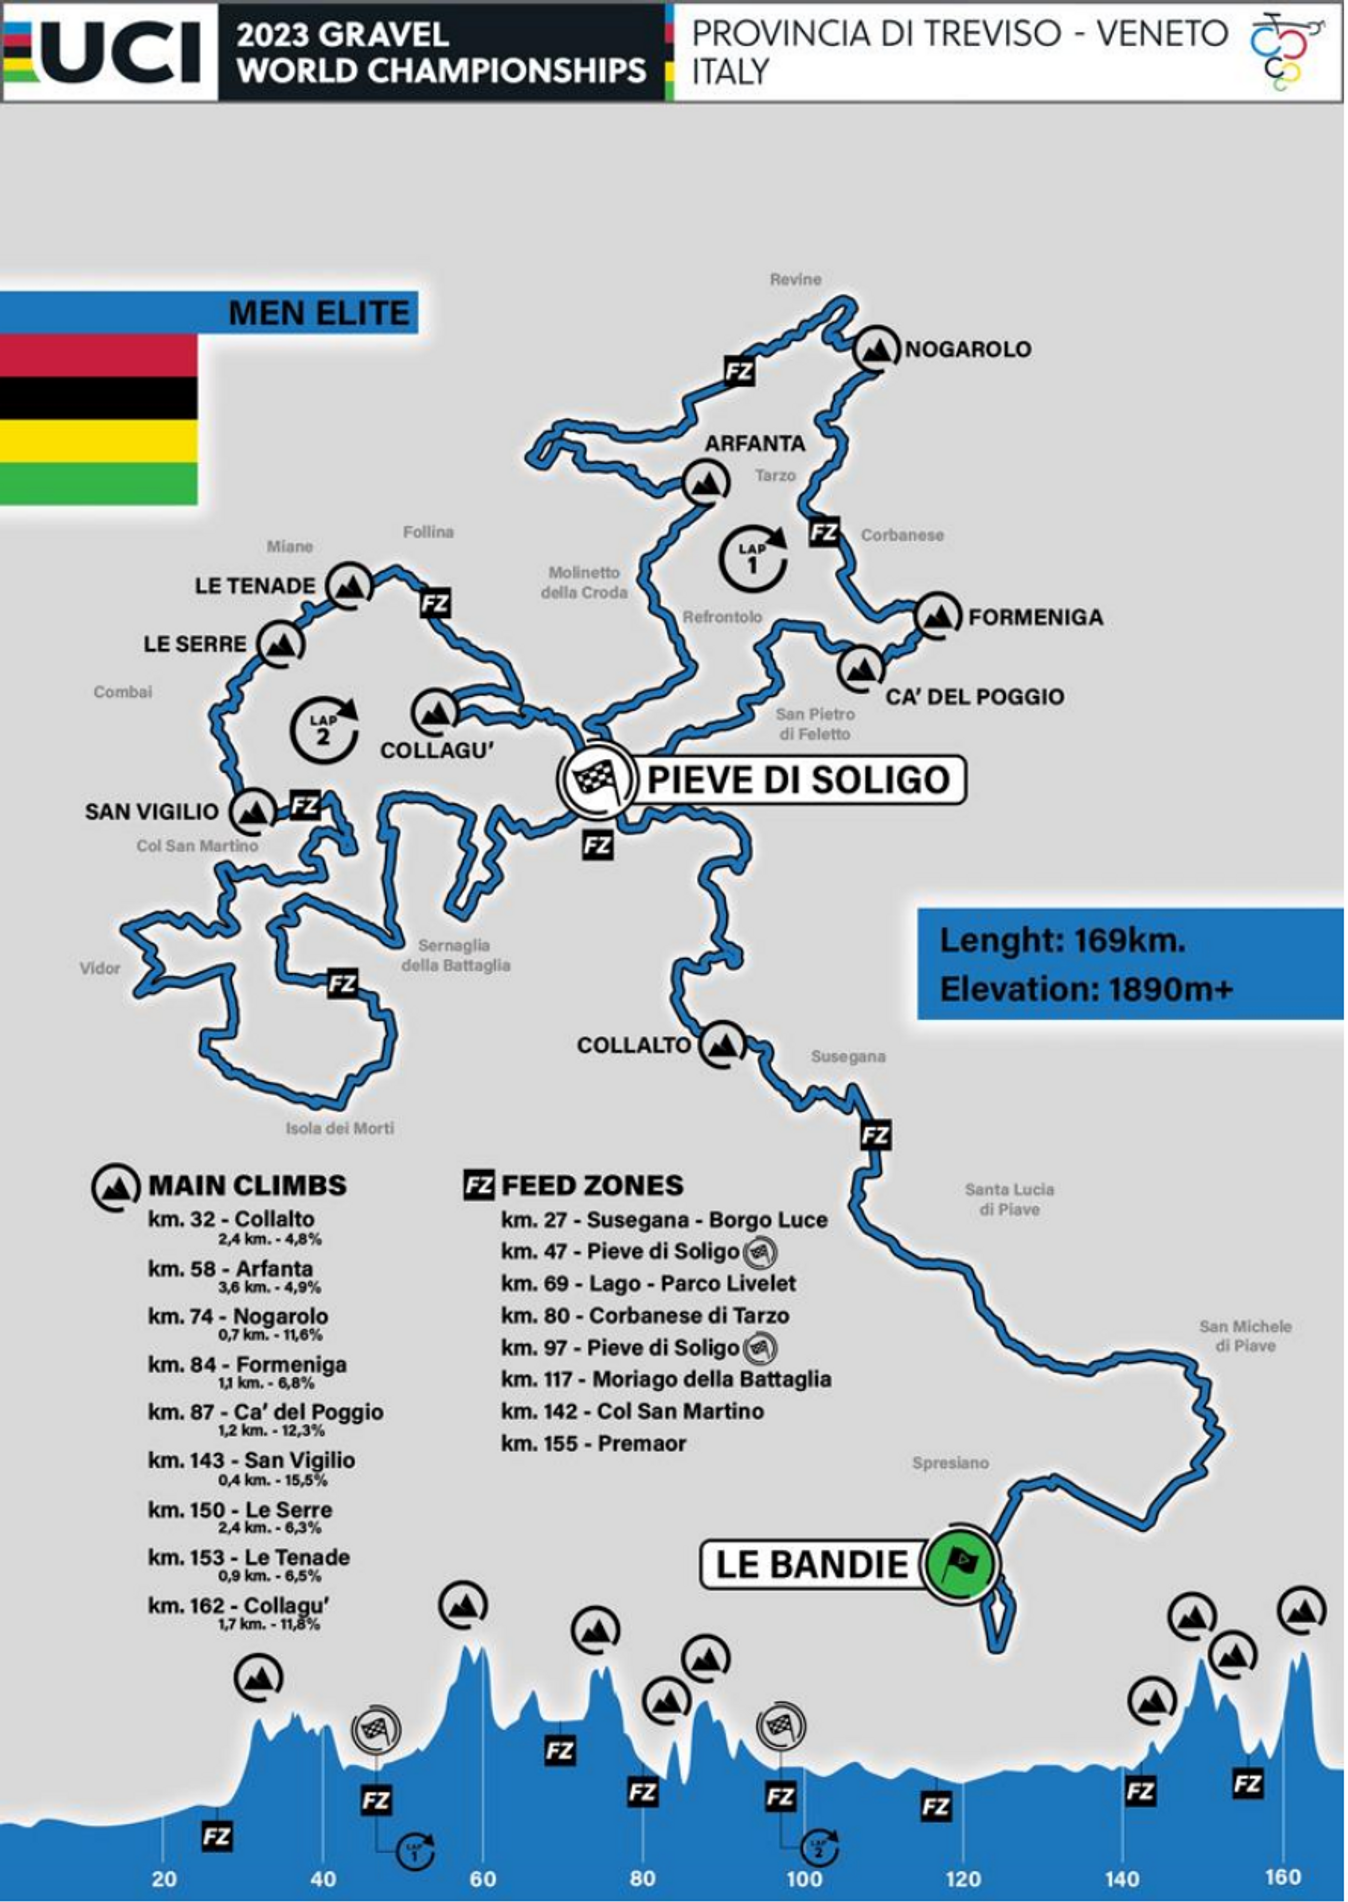 The men's race map and profile